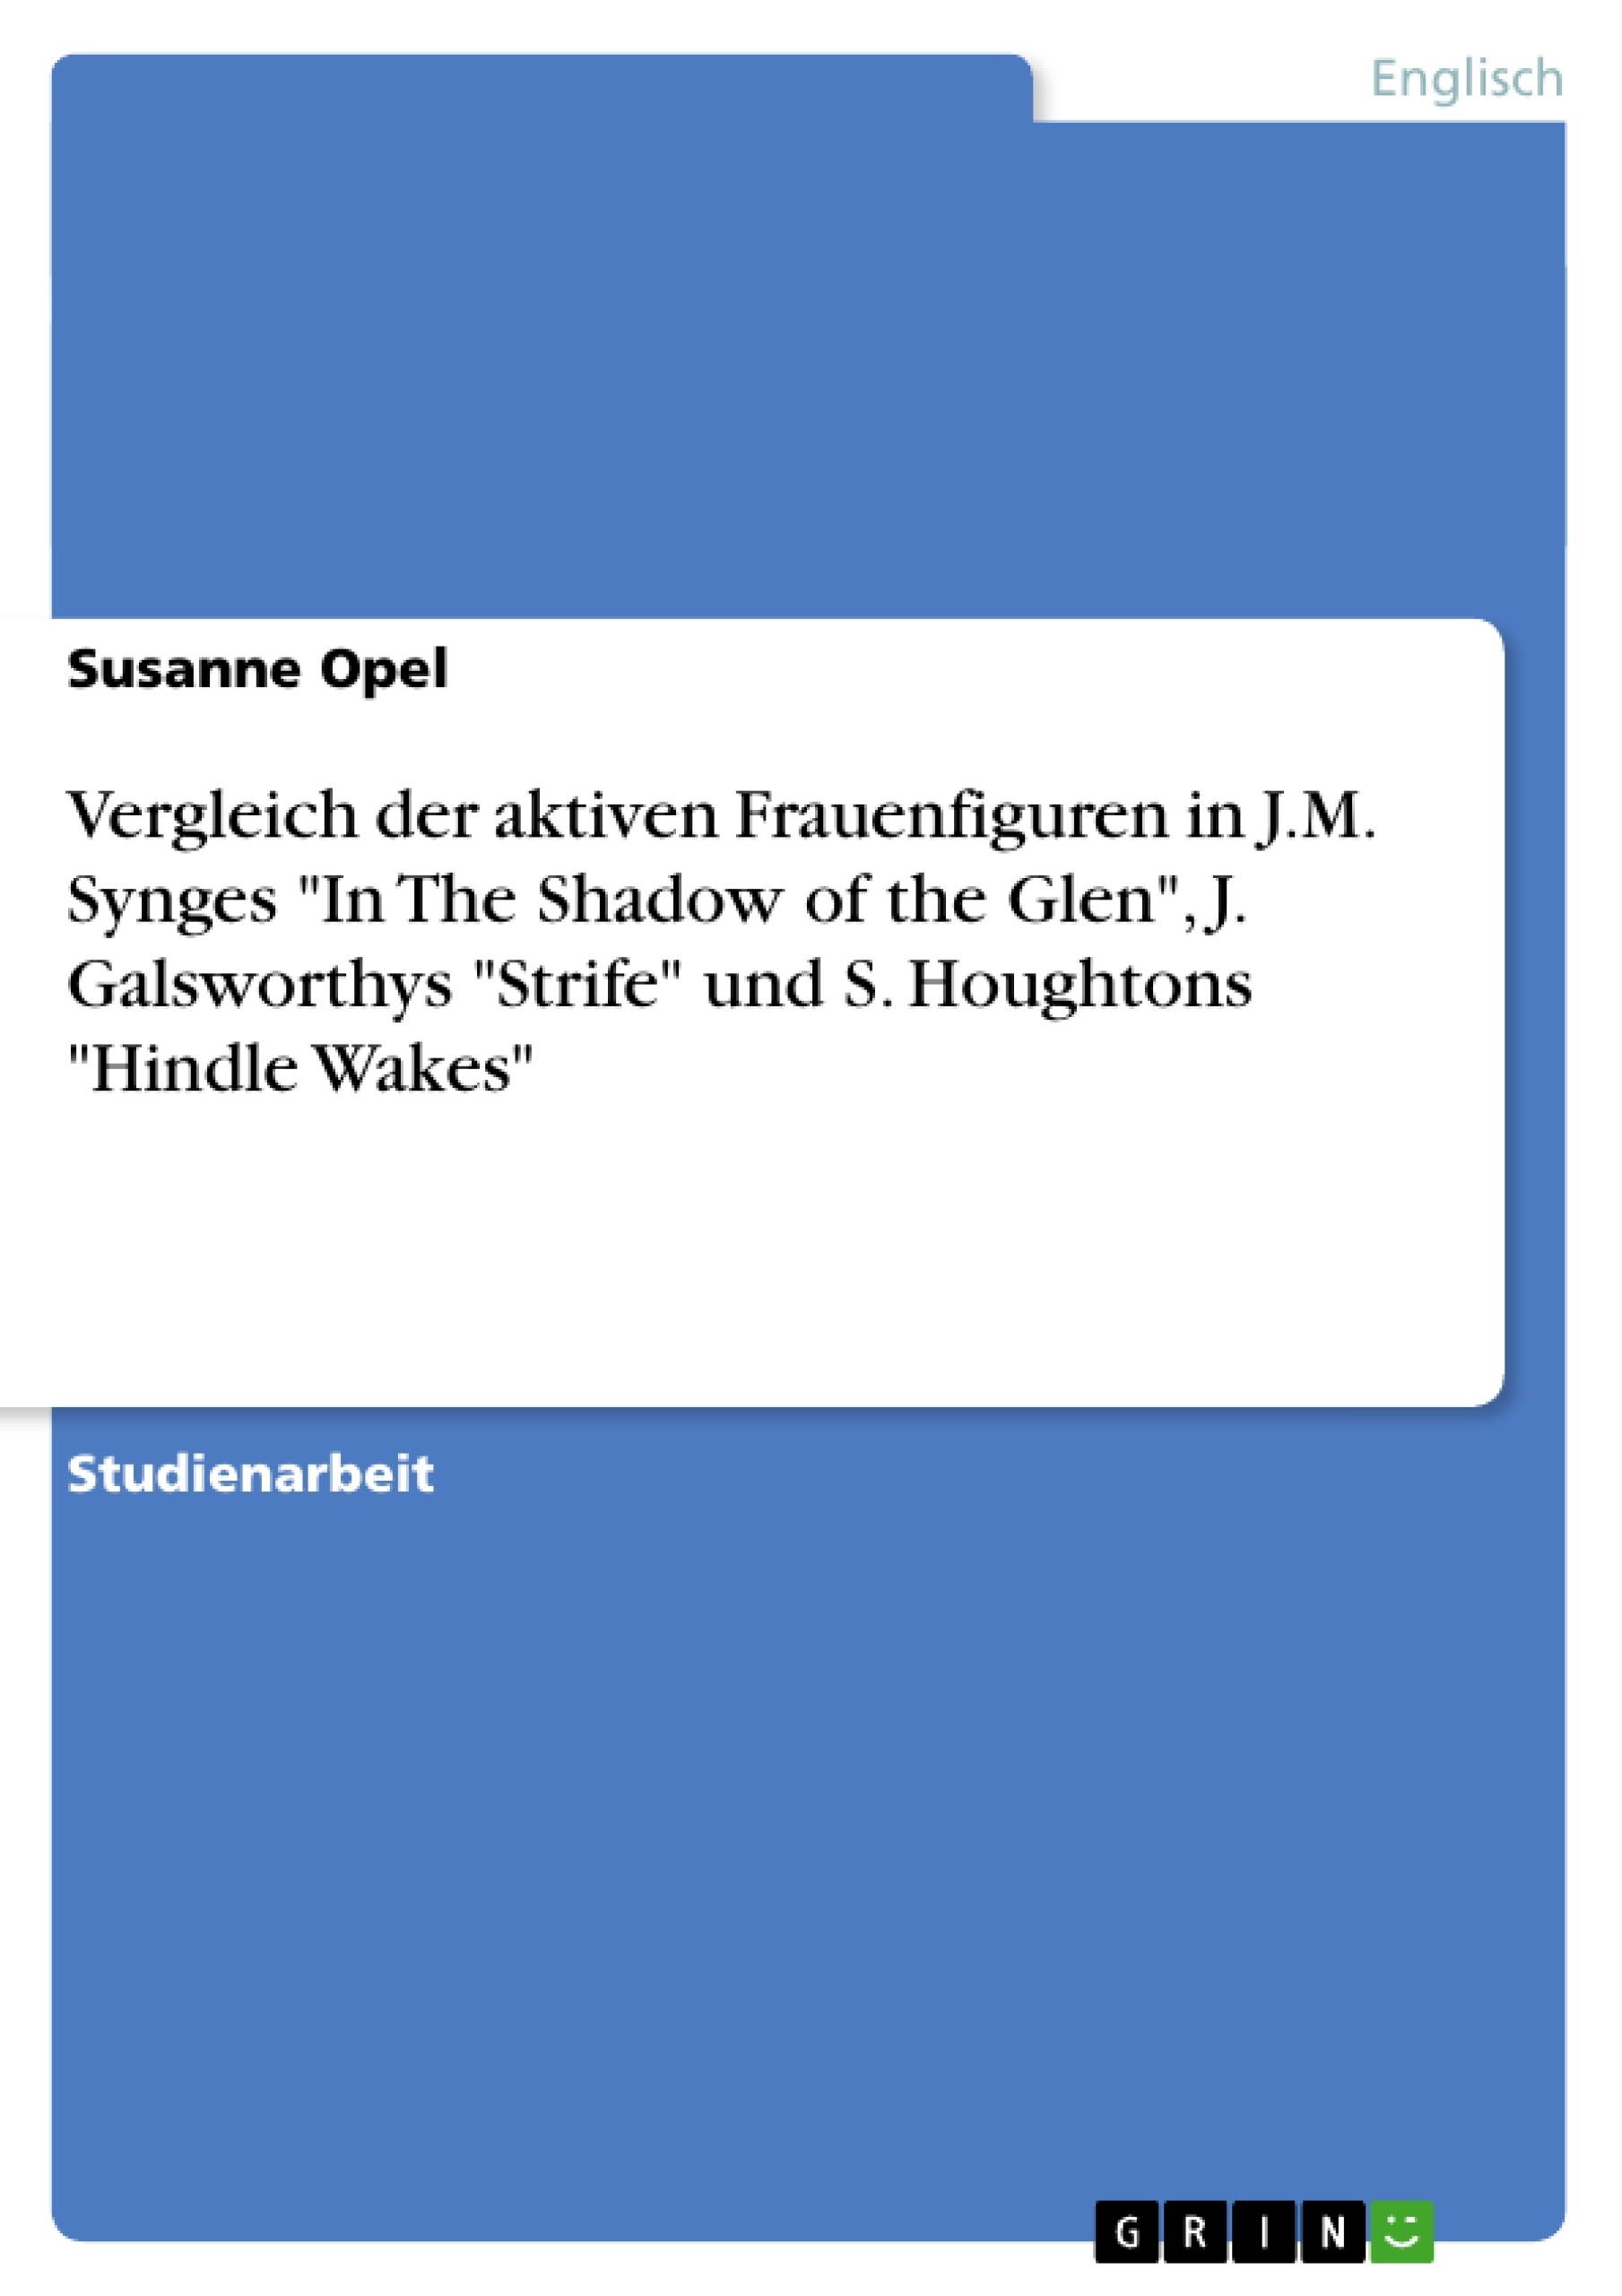 Titre: Vergleich der aktiven Frauenfiguren in J.M. Synges "In The Shadow of the Glen", J. Galsworthys "Strife" und S. Houghtons "Hindle Wakes"